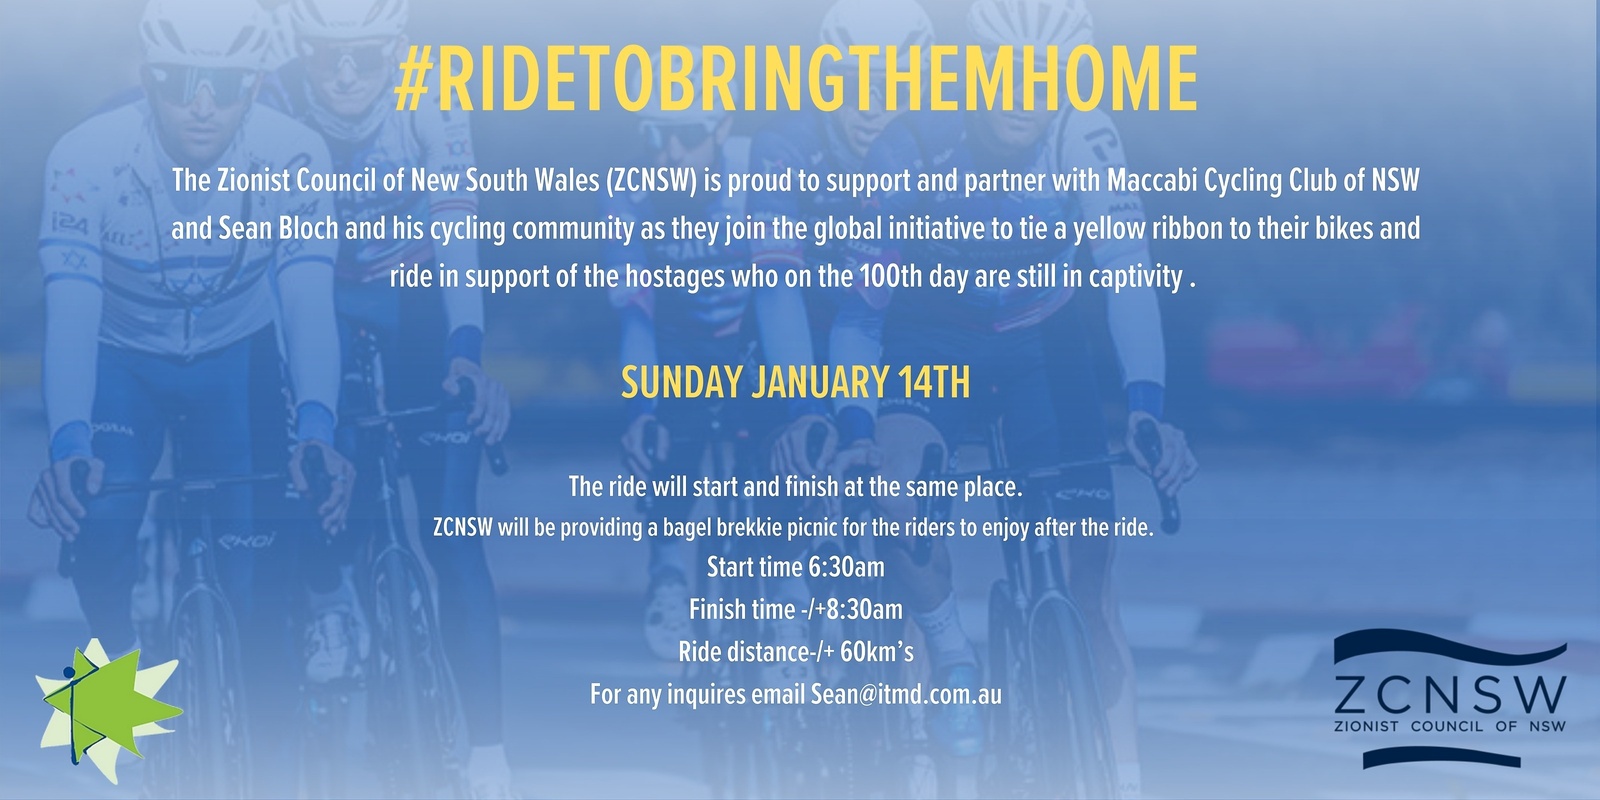 Banner image for #RIDE TO BRING THEM HOME in Sydney - 60KM